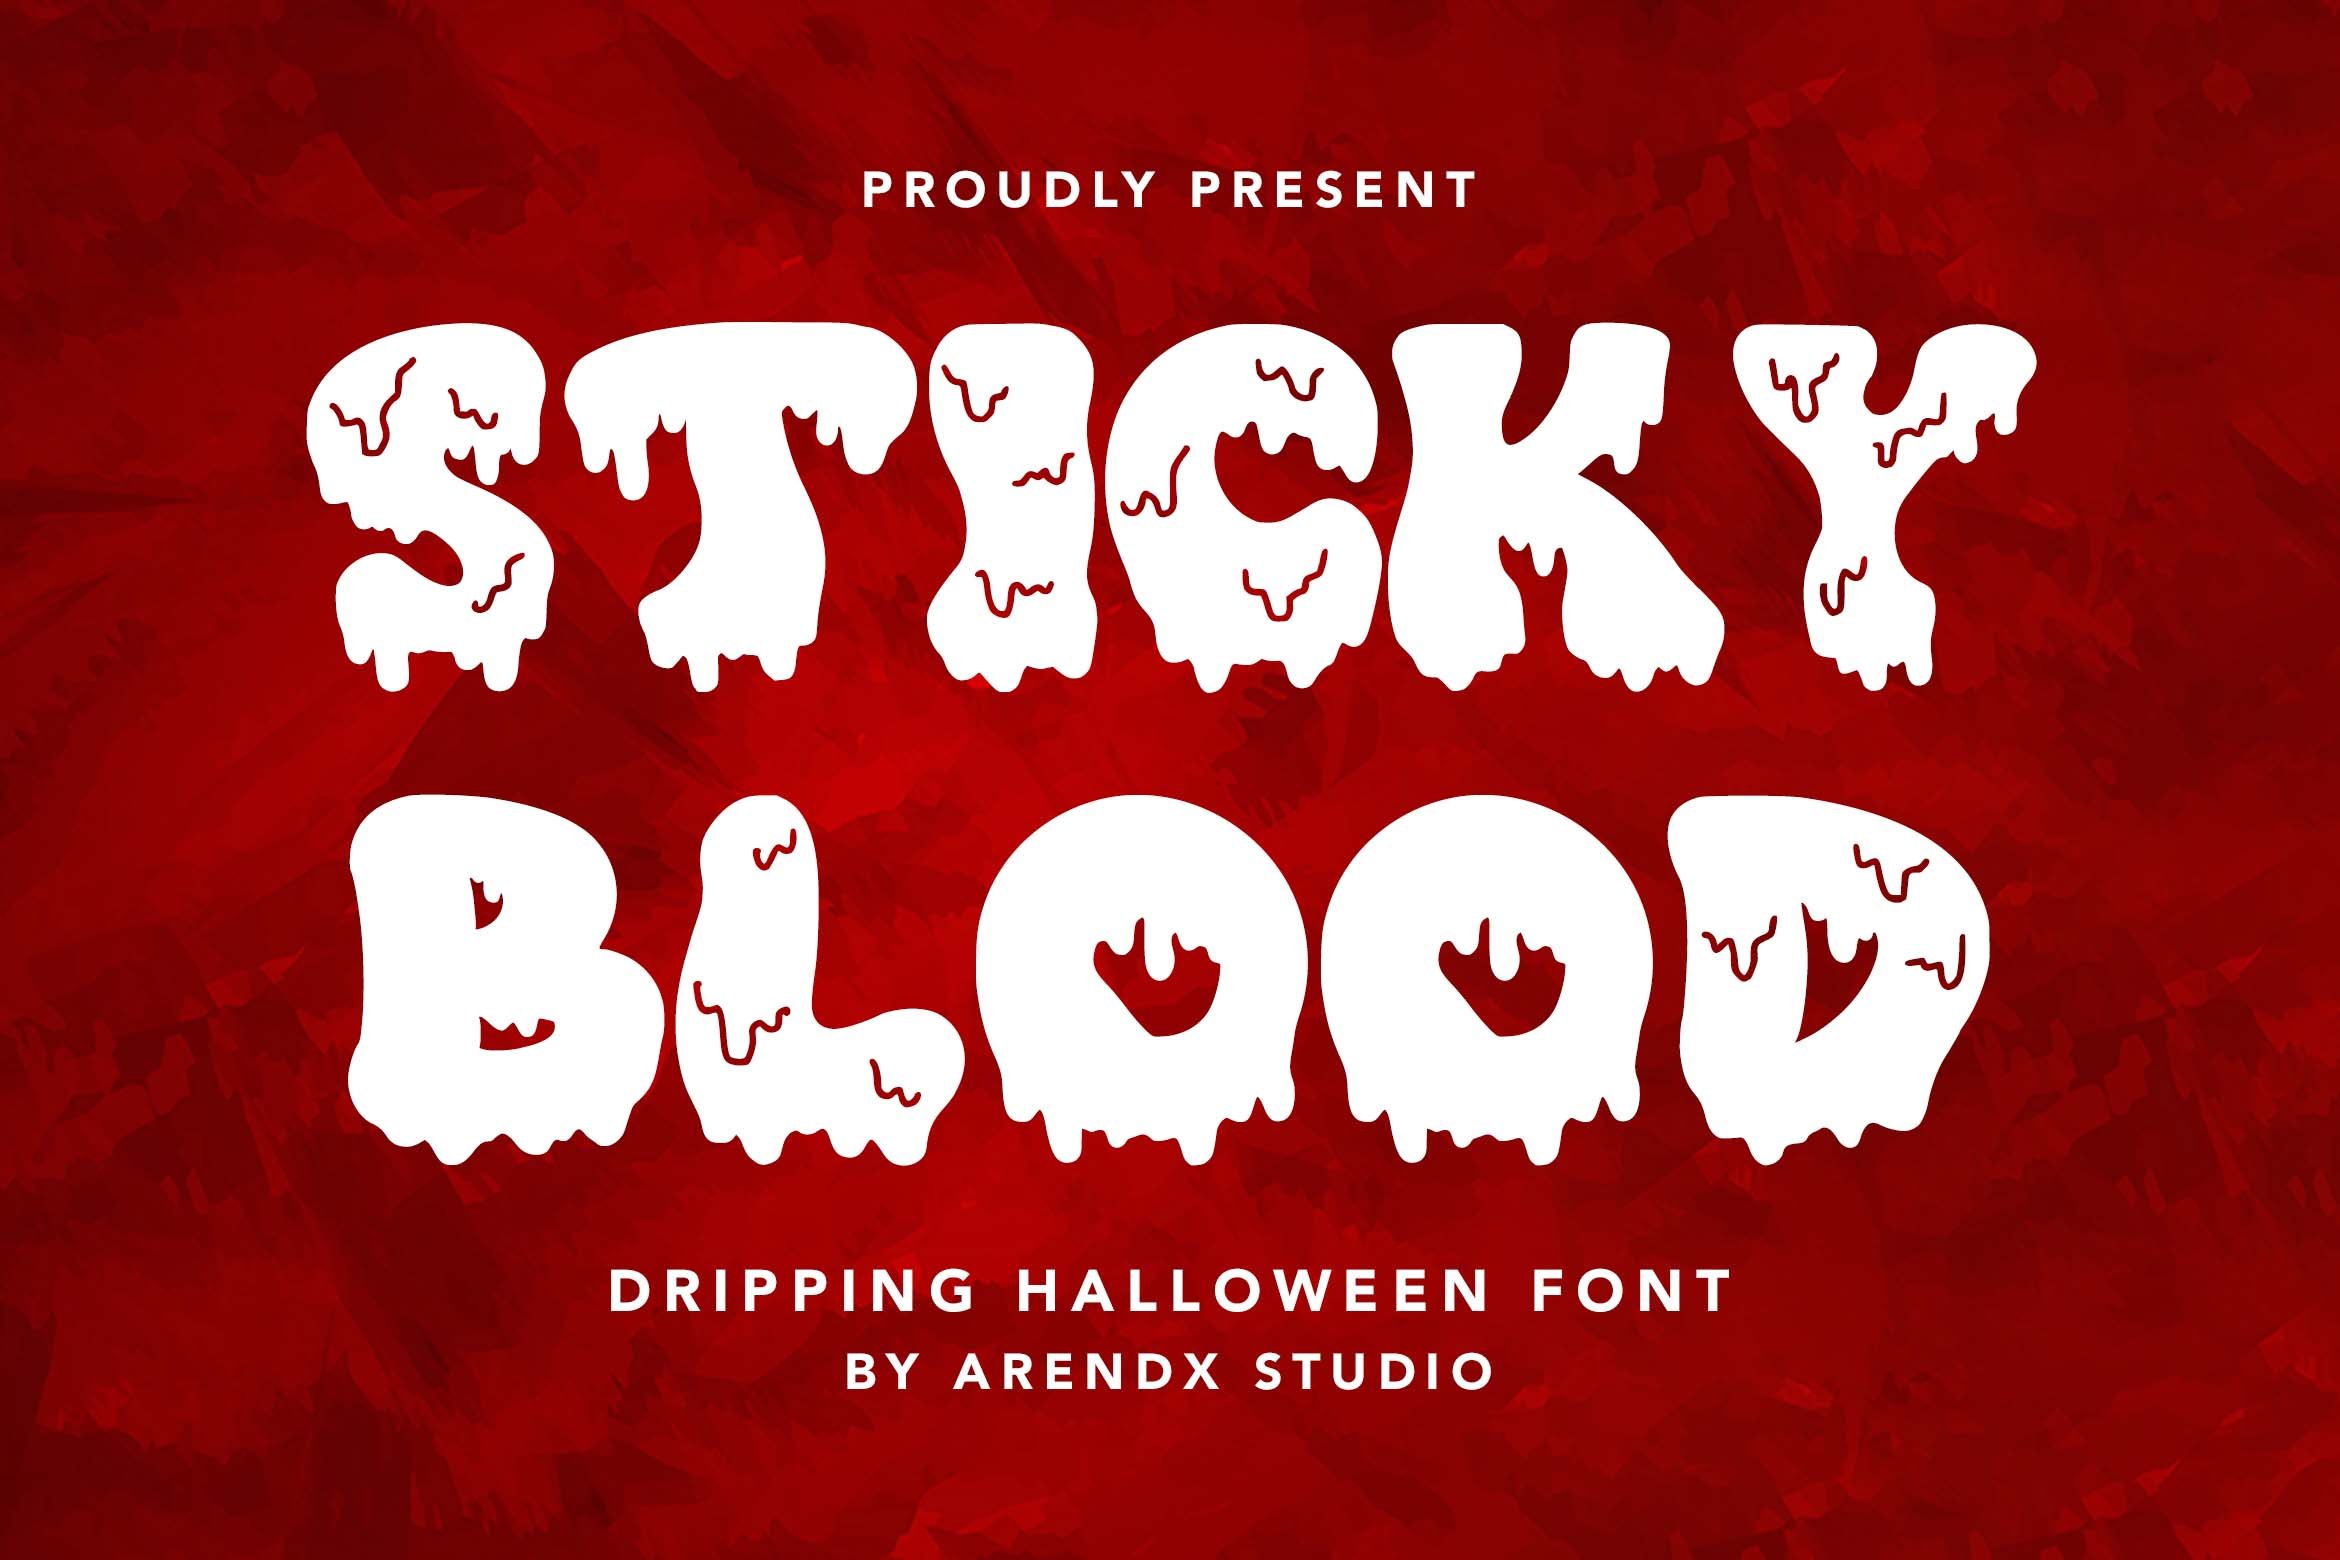 Sticky Blood - Halloween Font cover image.